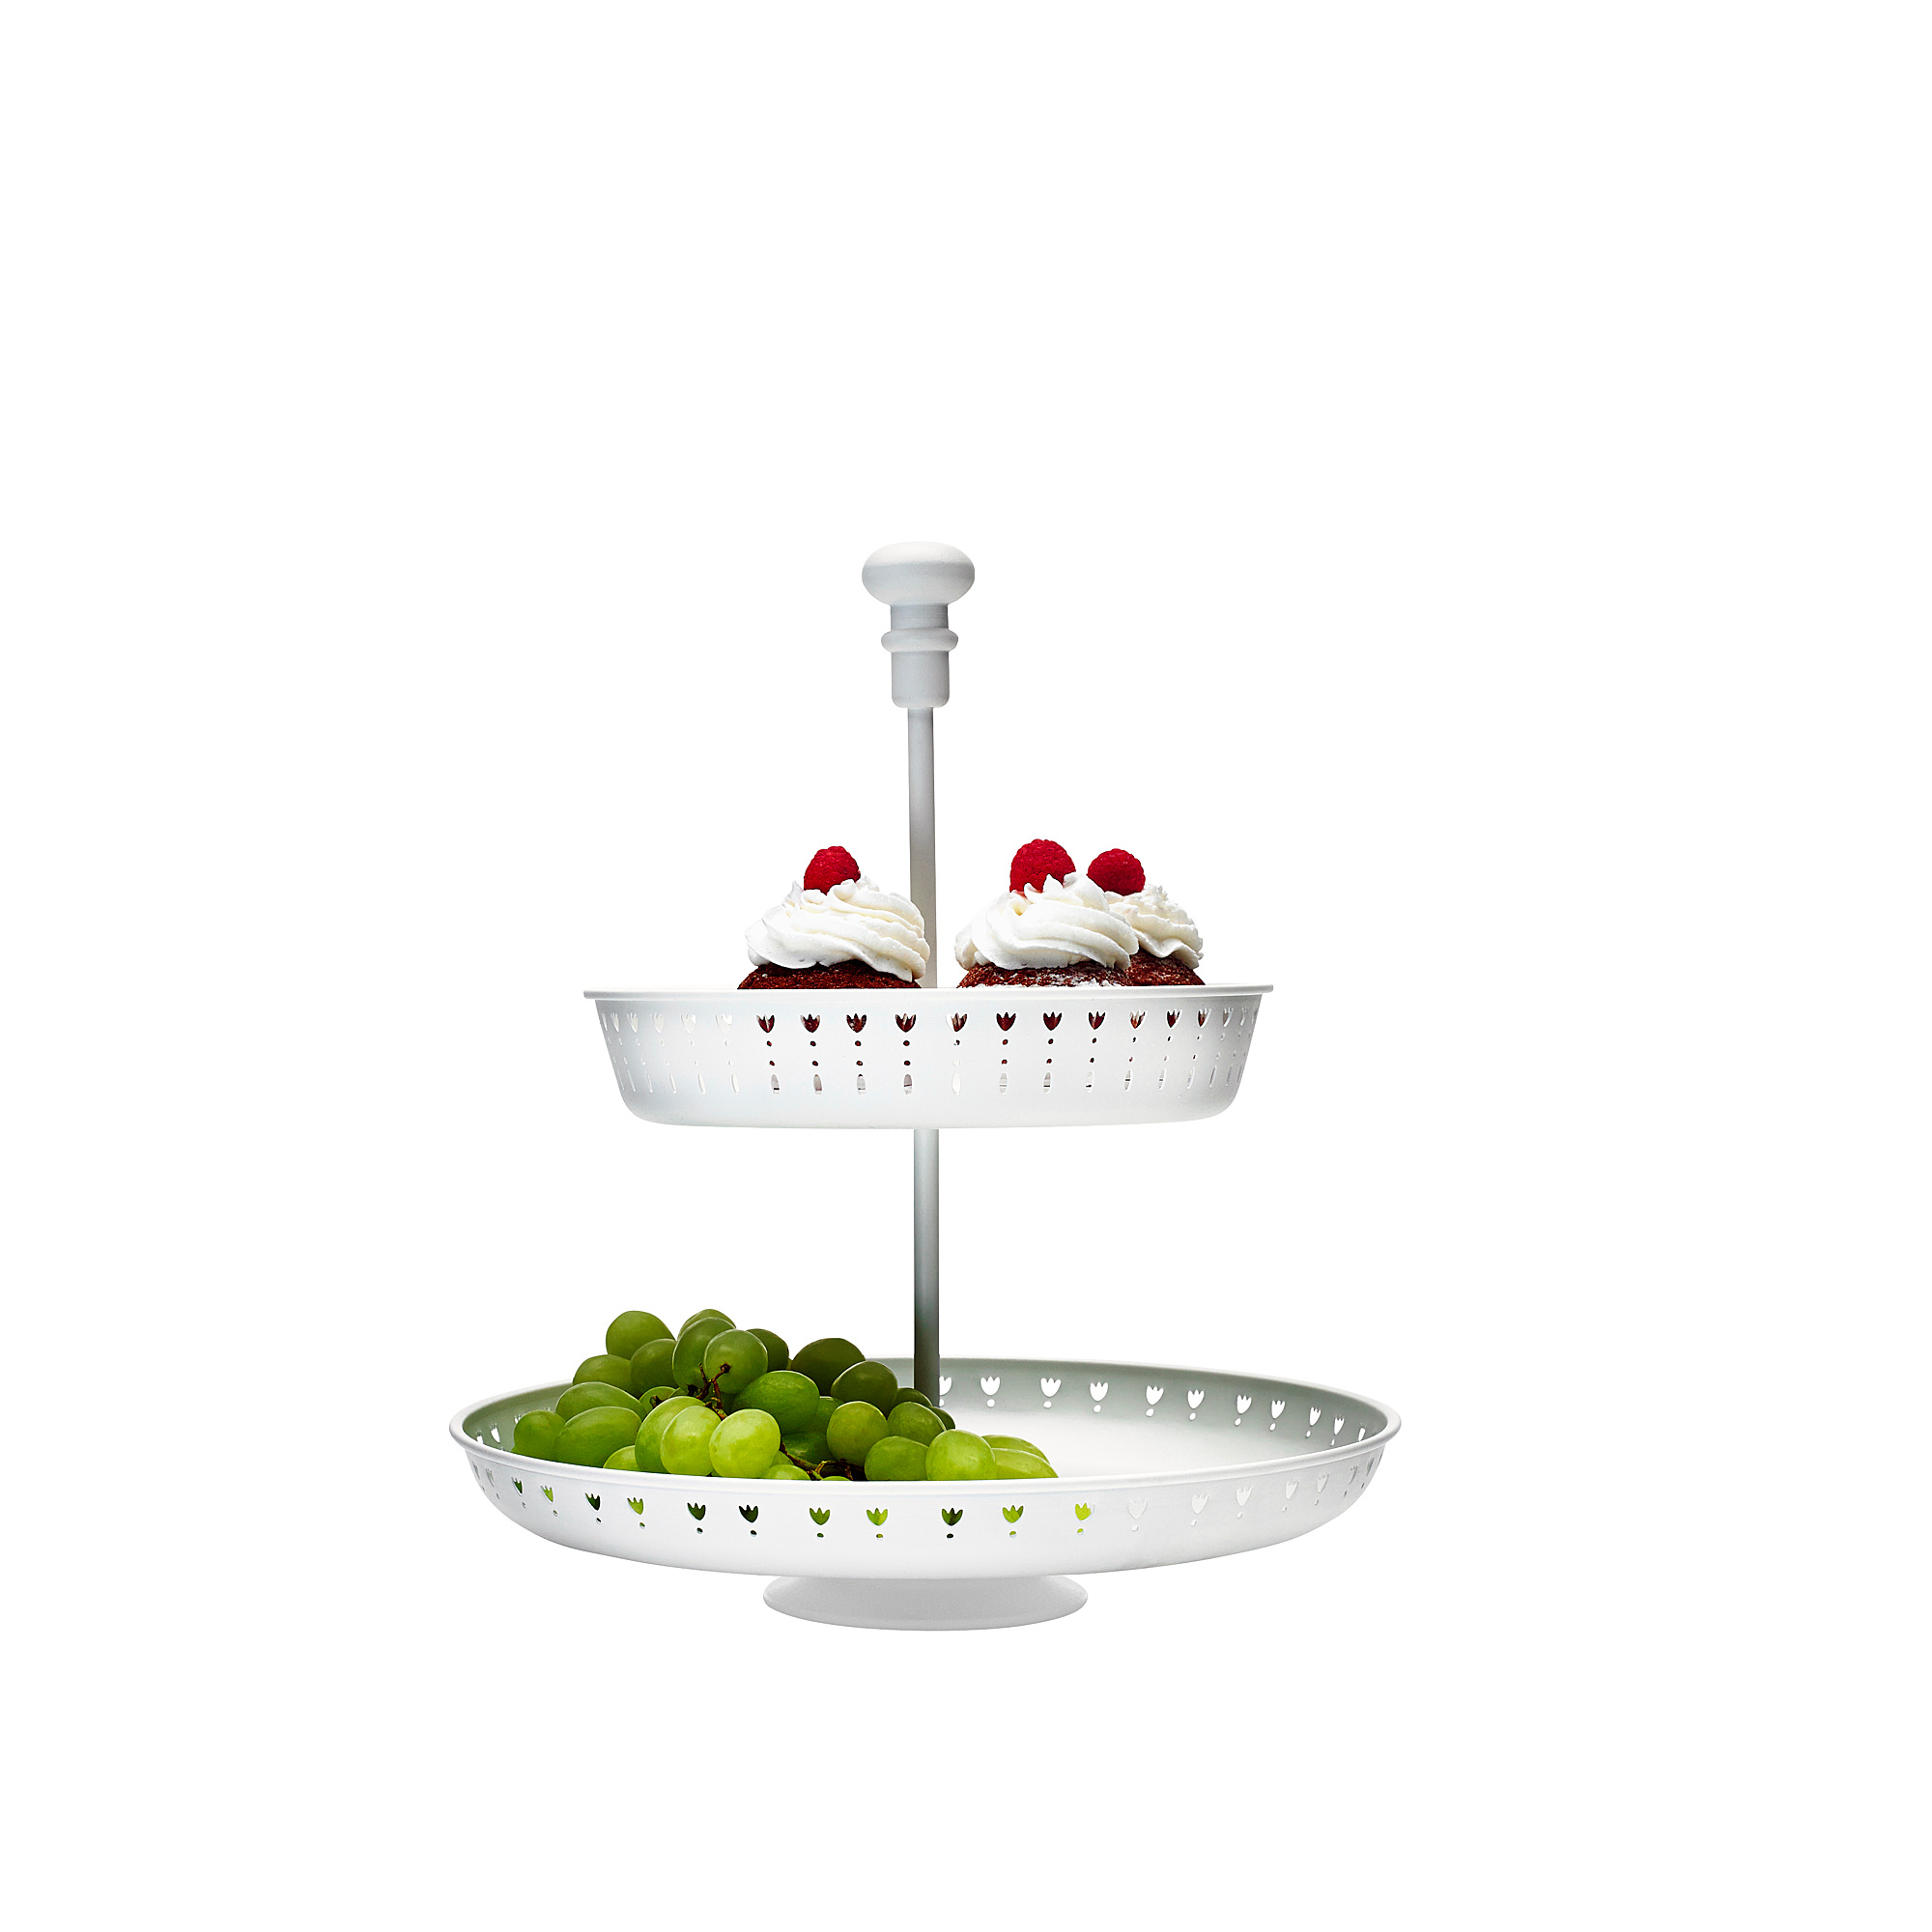 GARNERA serving stand, two tiers